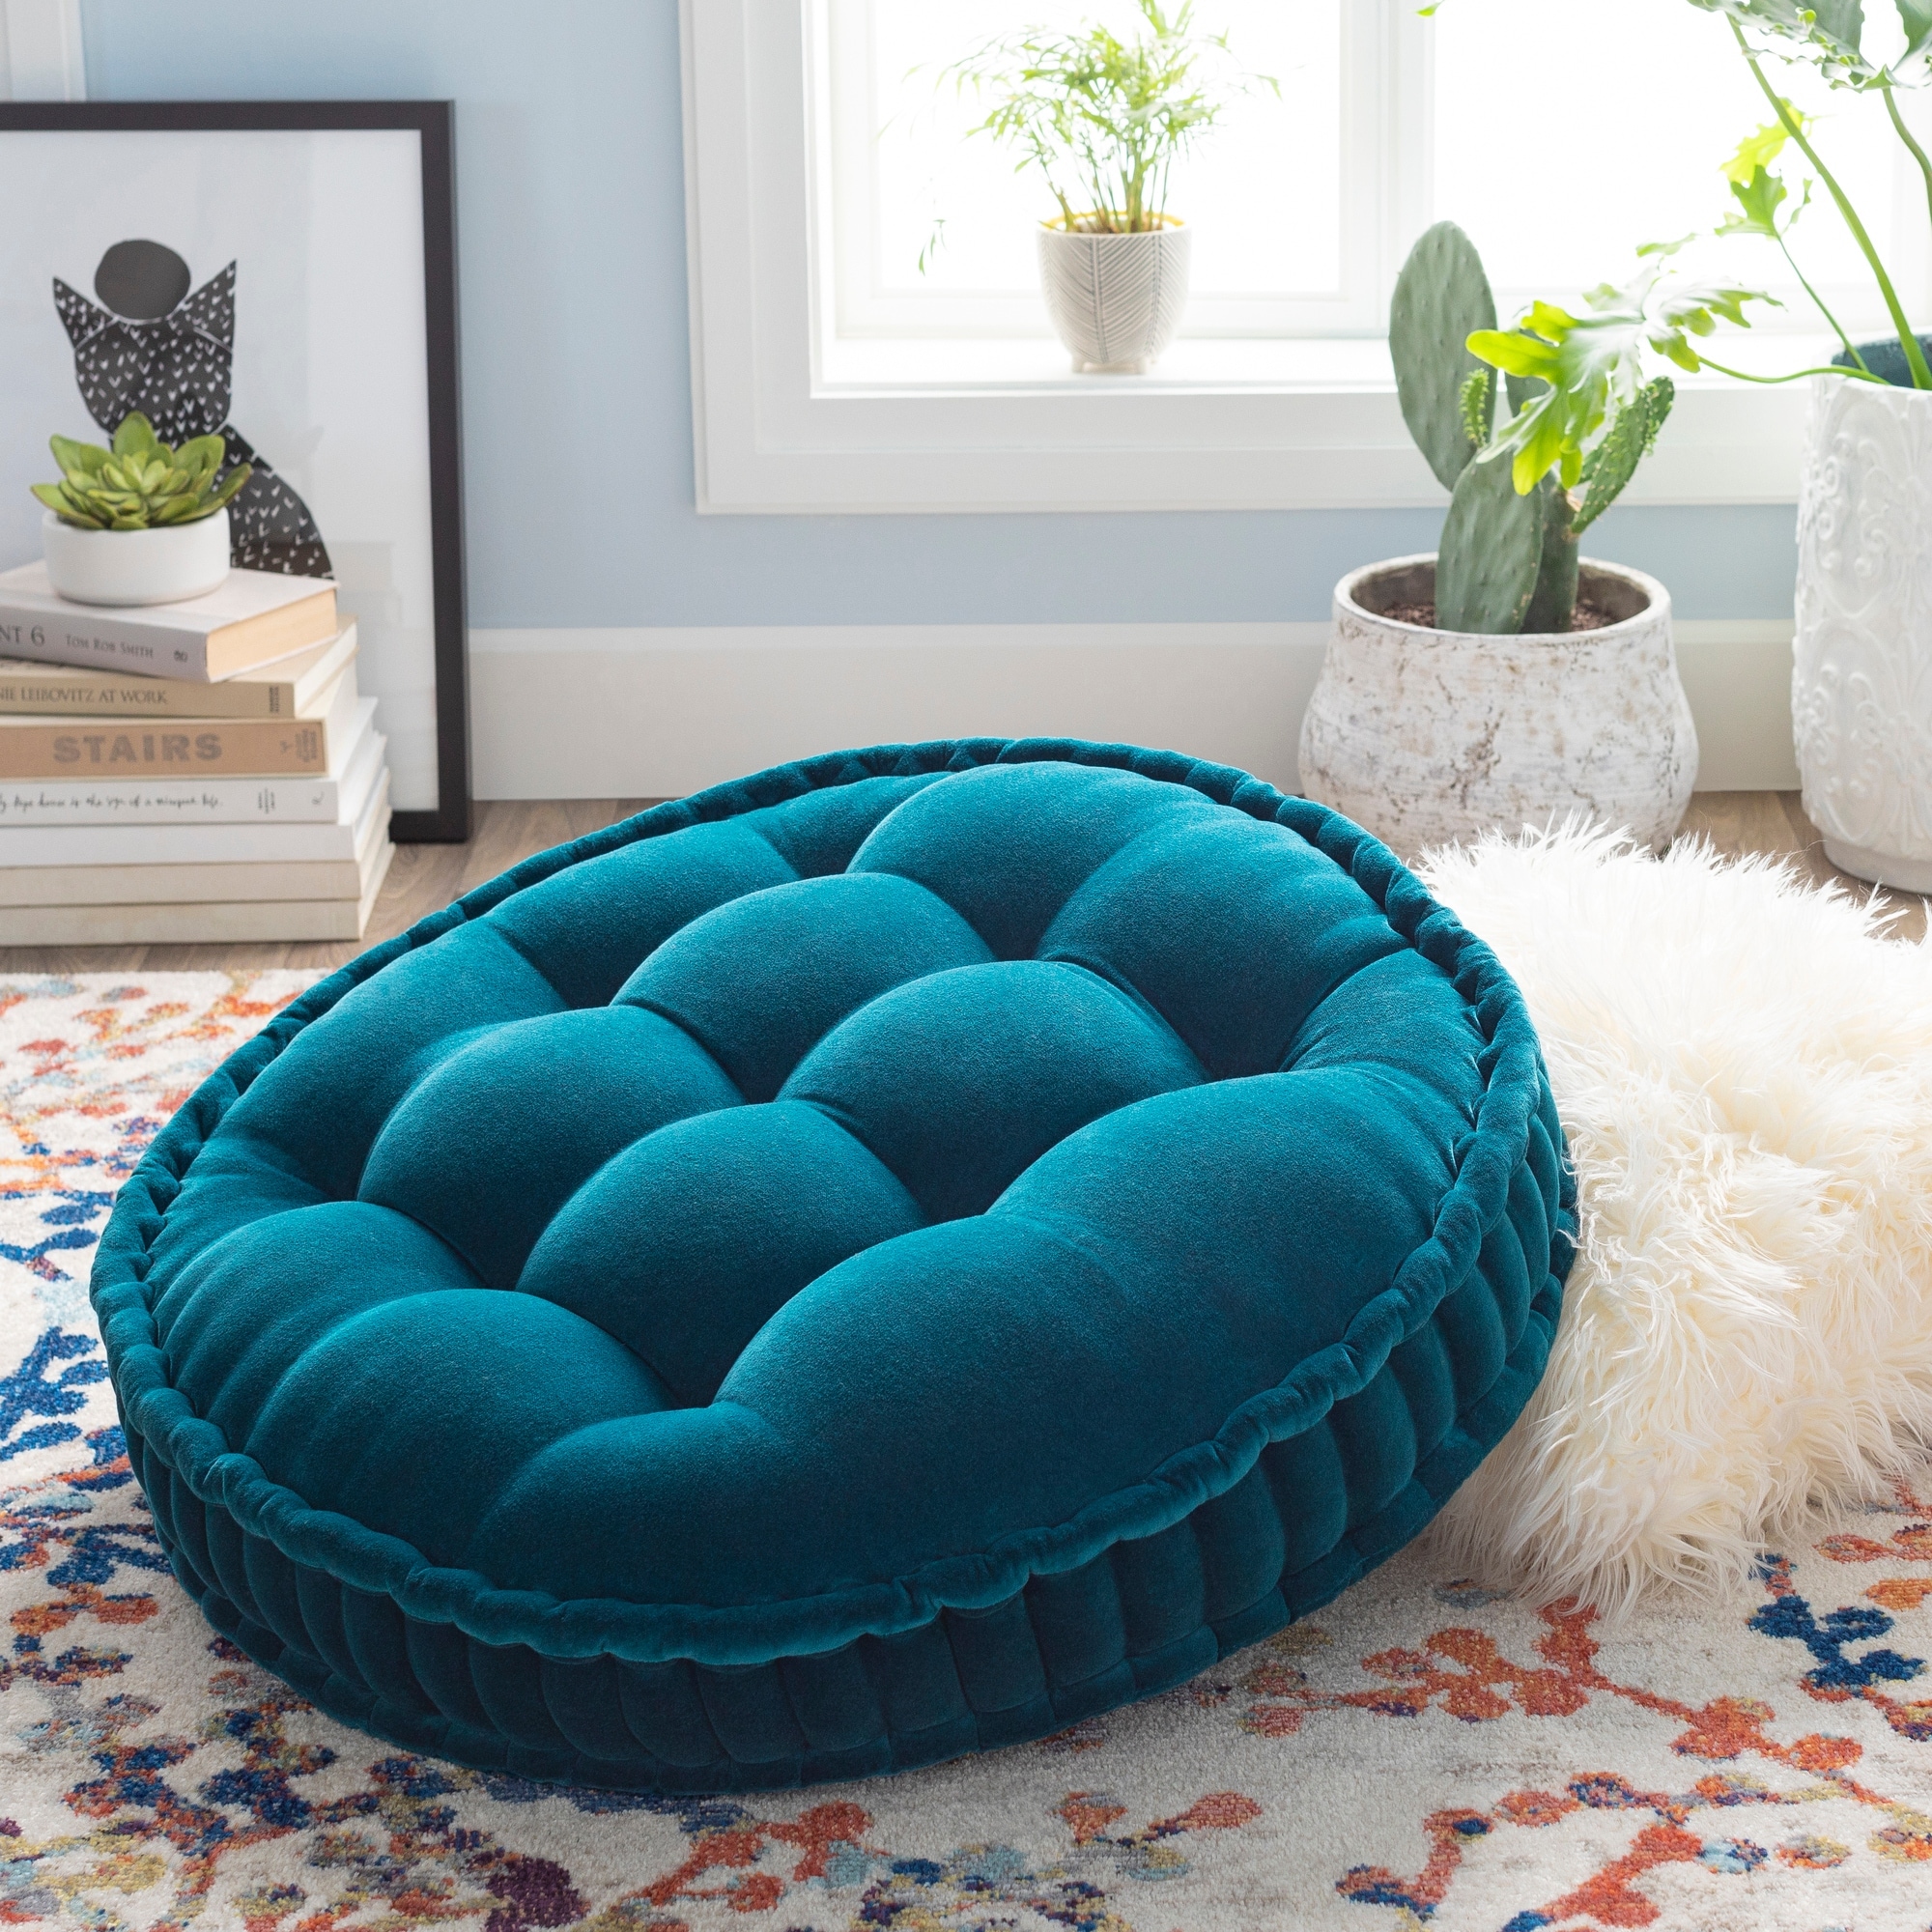 https://ak1.ostkcdn.com/images/products/is/images/direct/26a1a9d7c20b72488bd71e95802cfd30642ebc43/The-Curated-Nomad-Atlanta-30-inch-Tufted-Velvet-Floor-Pillow.jpg